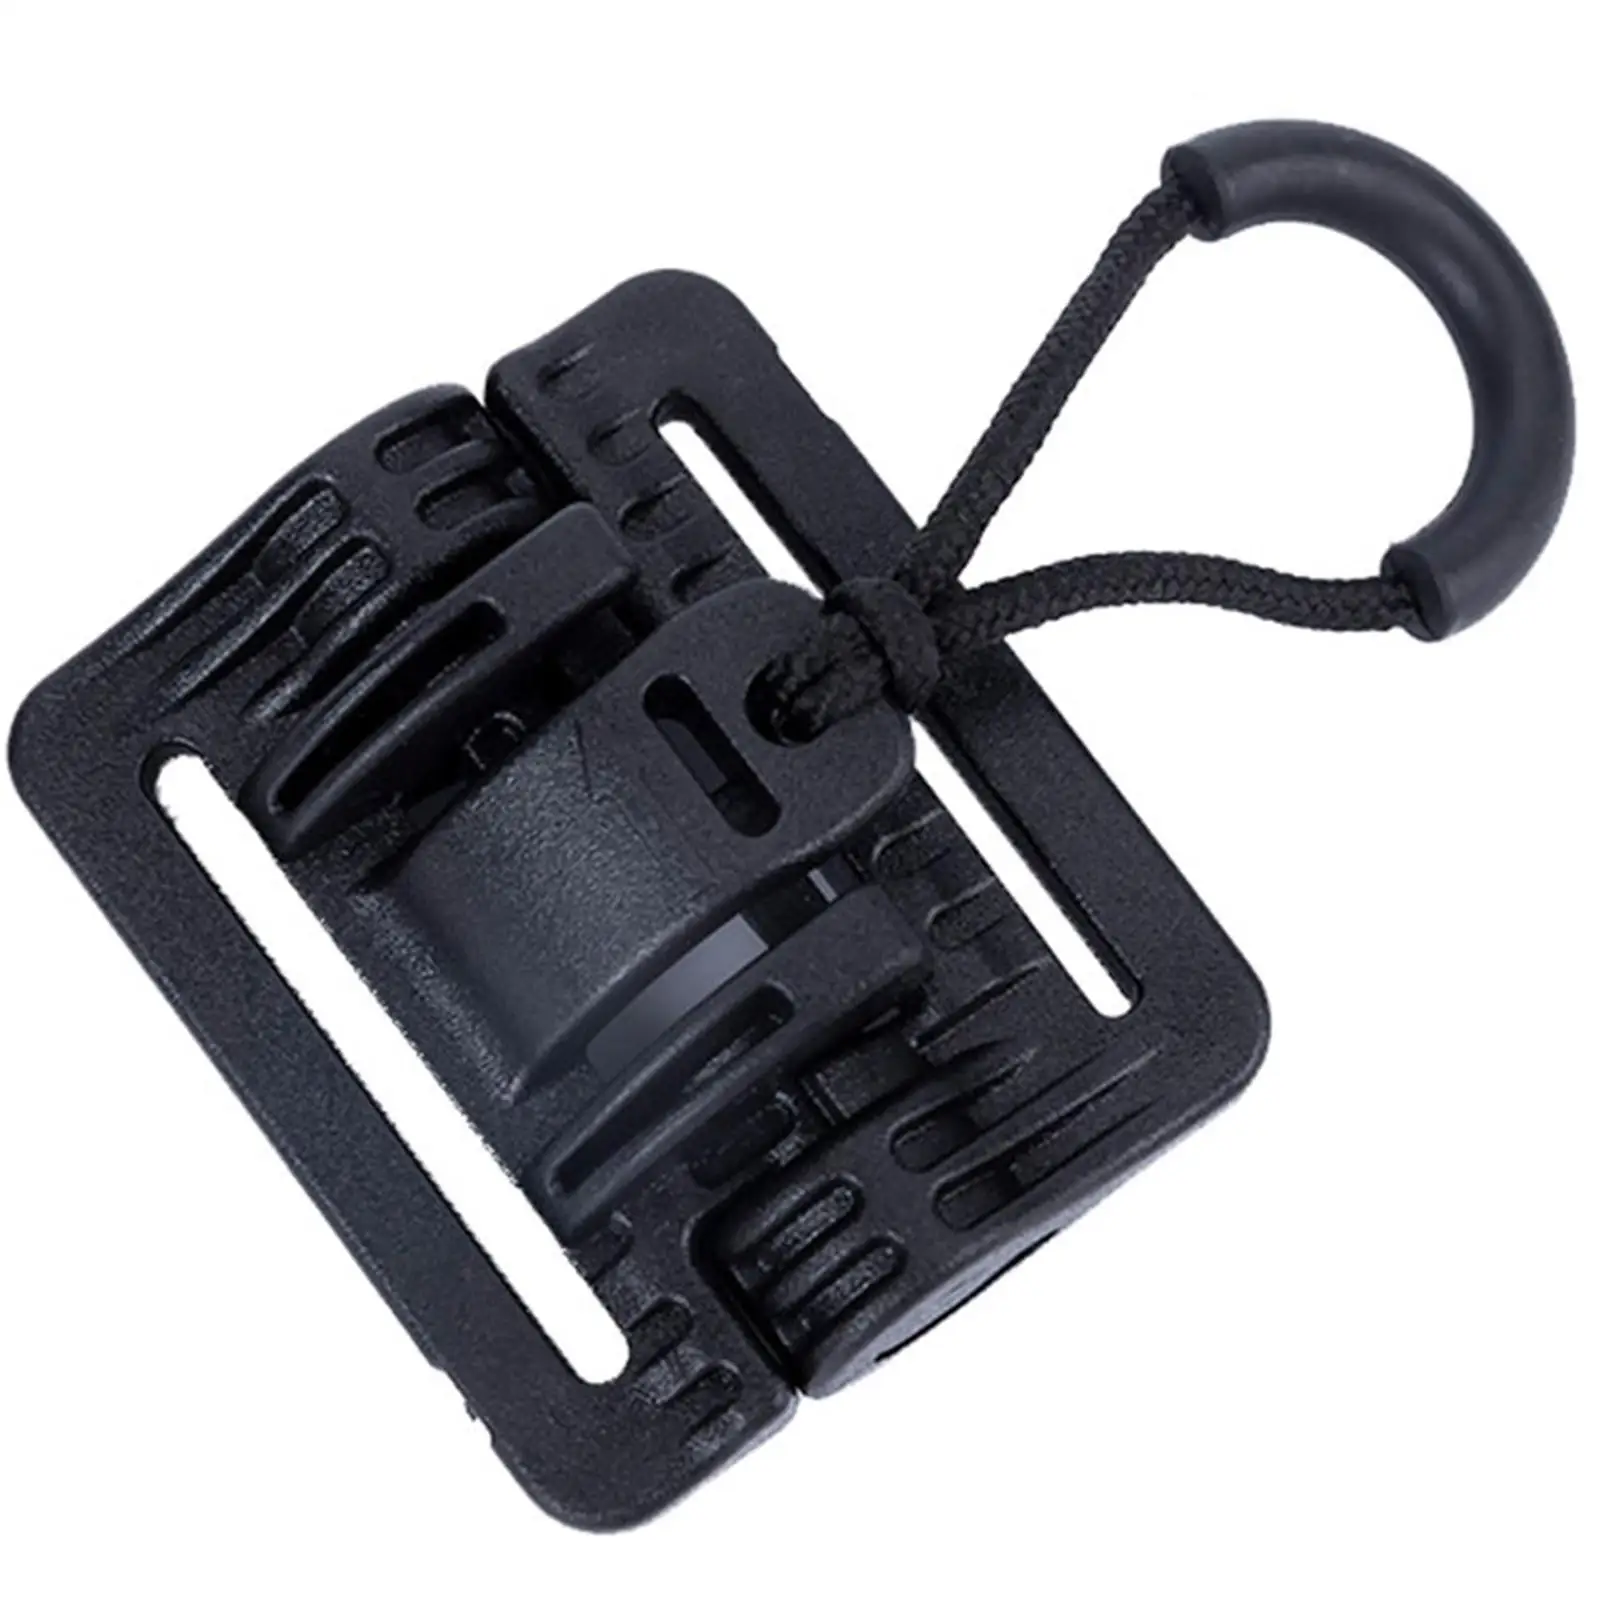 Vest Quick Release Buckle Quick Release System 1.5 inch Removal Buckle for Plate